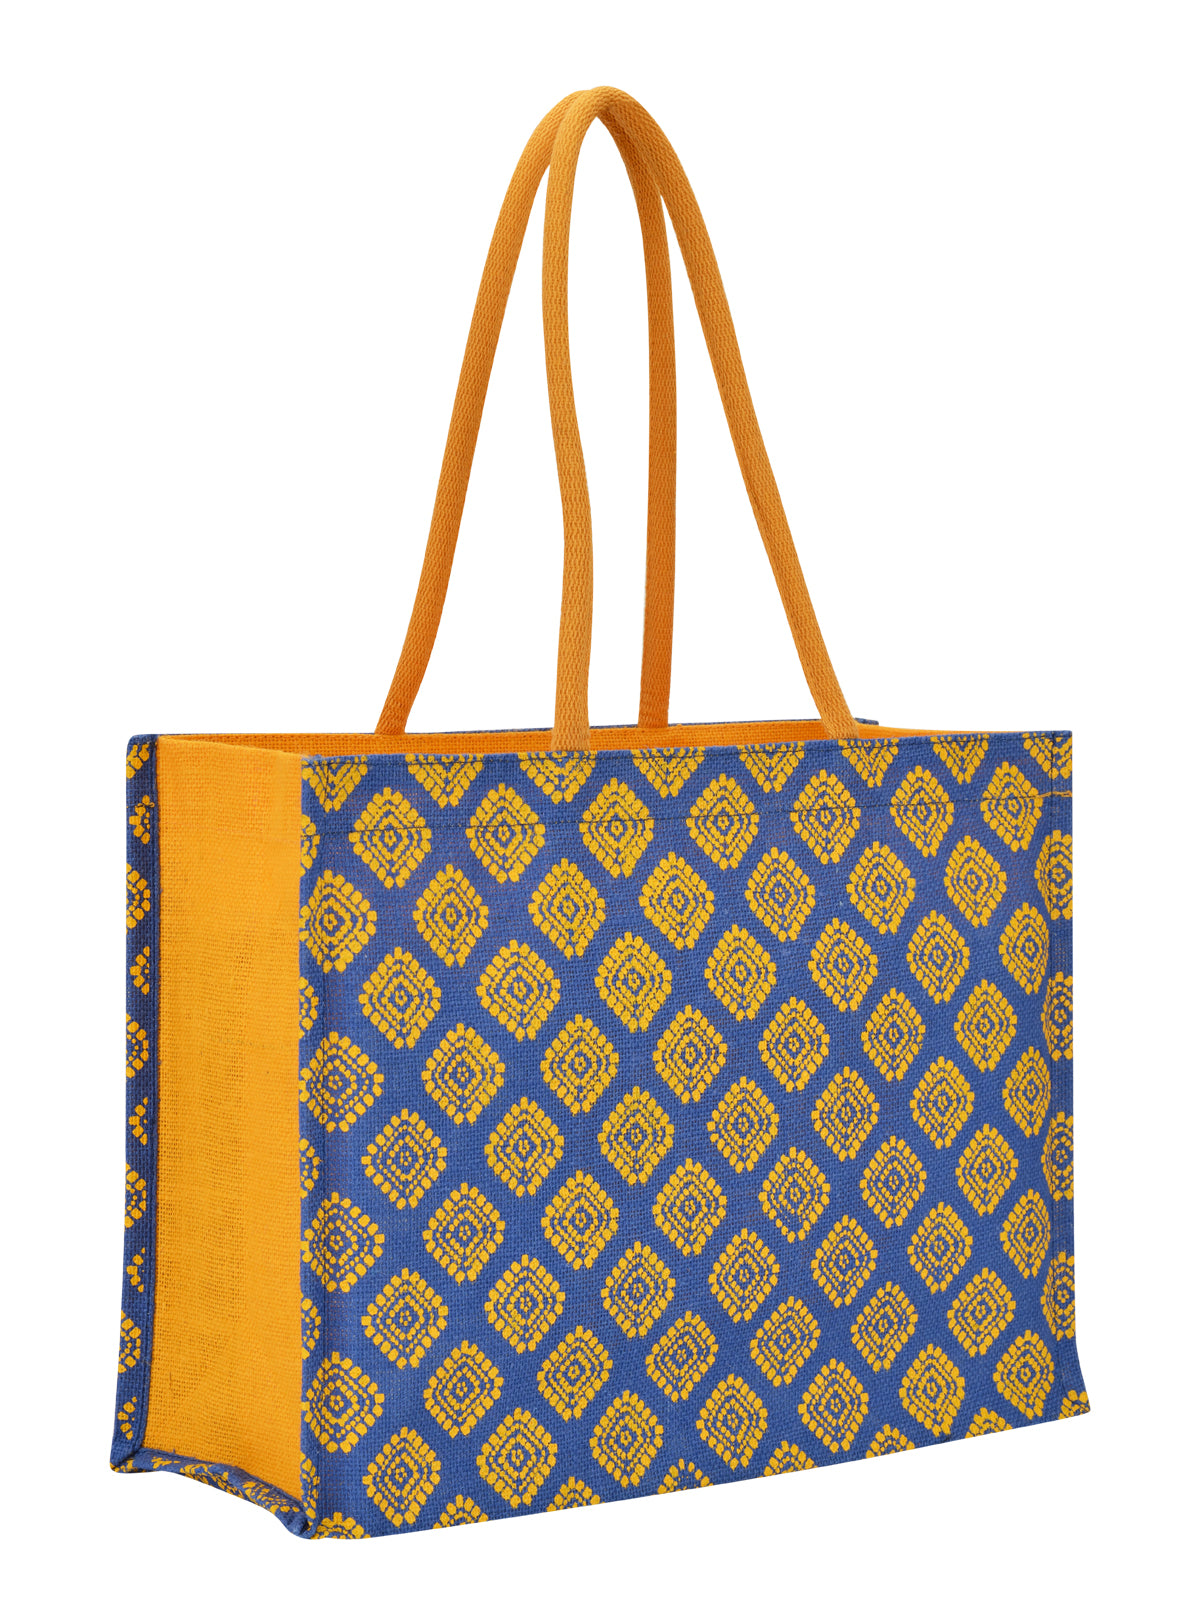 Folding 12x16 Inch Off White Cotton Carry Bag, Capacity: 7 To 8kg,  Size/Dimension: 14X18 at Rs 12.50/piece in Bengaluru